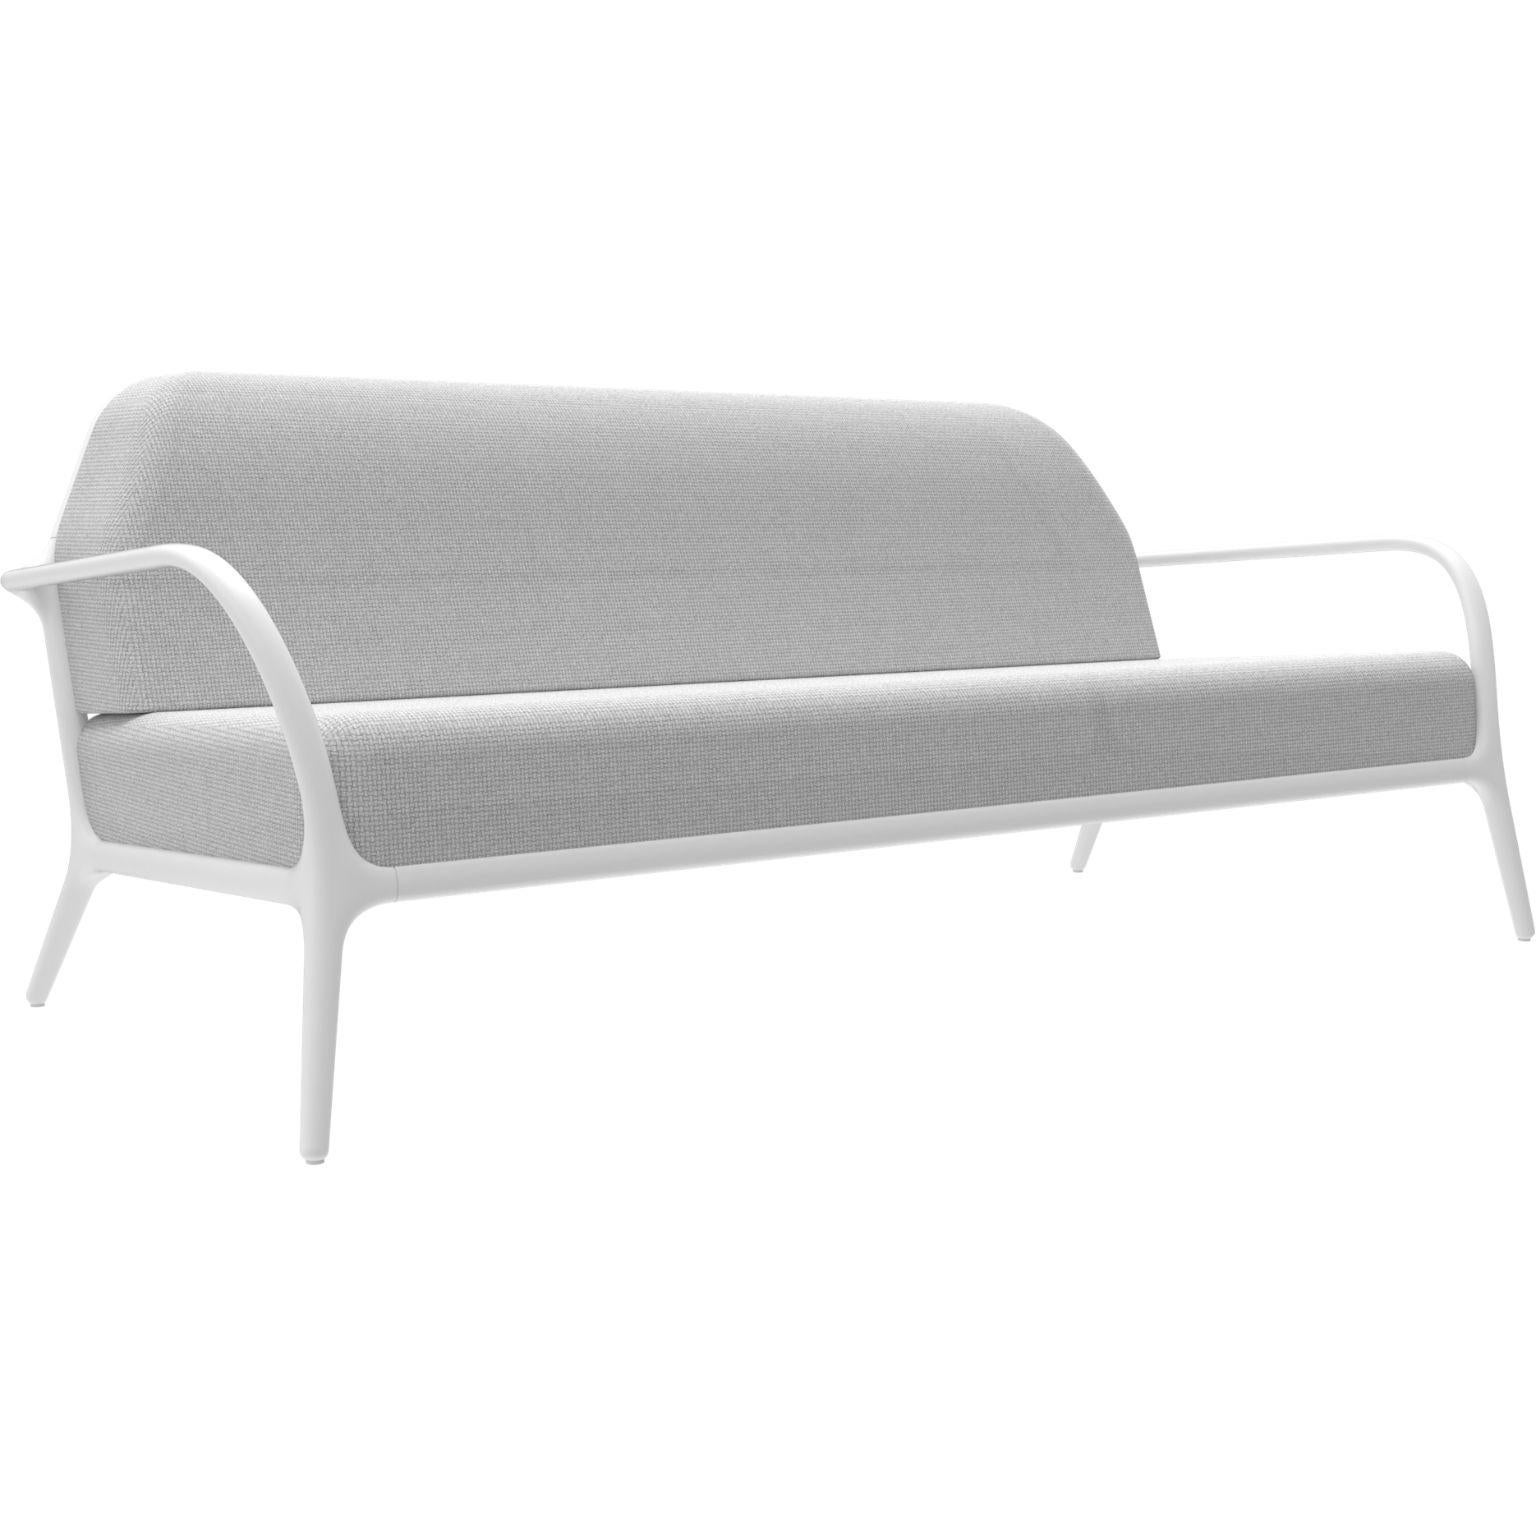 Xaloc white sofa by MOWEE
Dimensions: D100 x W200 x H81 cm (Seat Height 42 cm)
Material: aluminium, textile
Weight: 46 kg
Also available in different colours and finishes. 

 Xaloc synthesizes the lines of interior furniture to extrapolate to